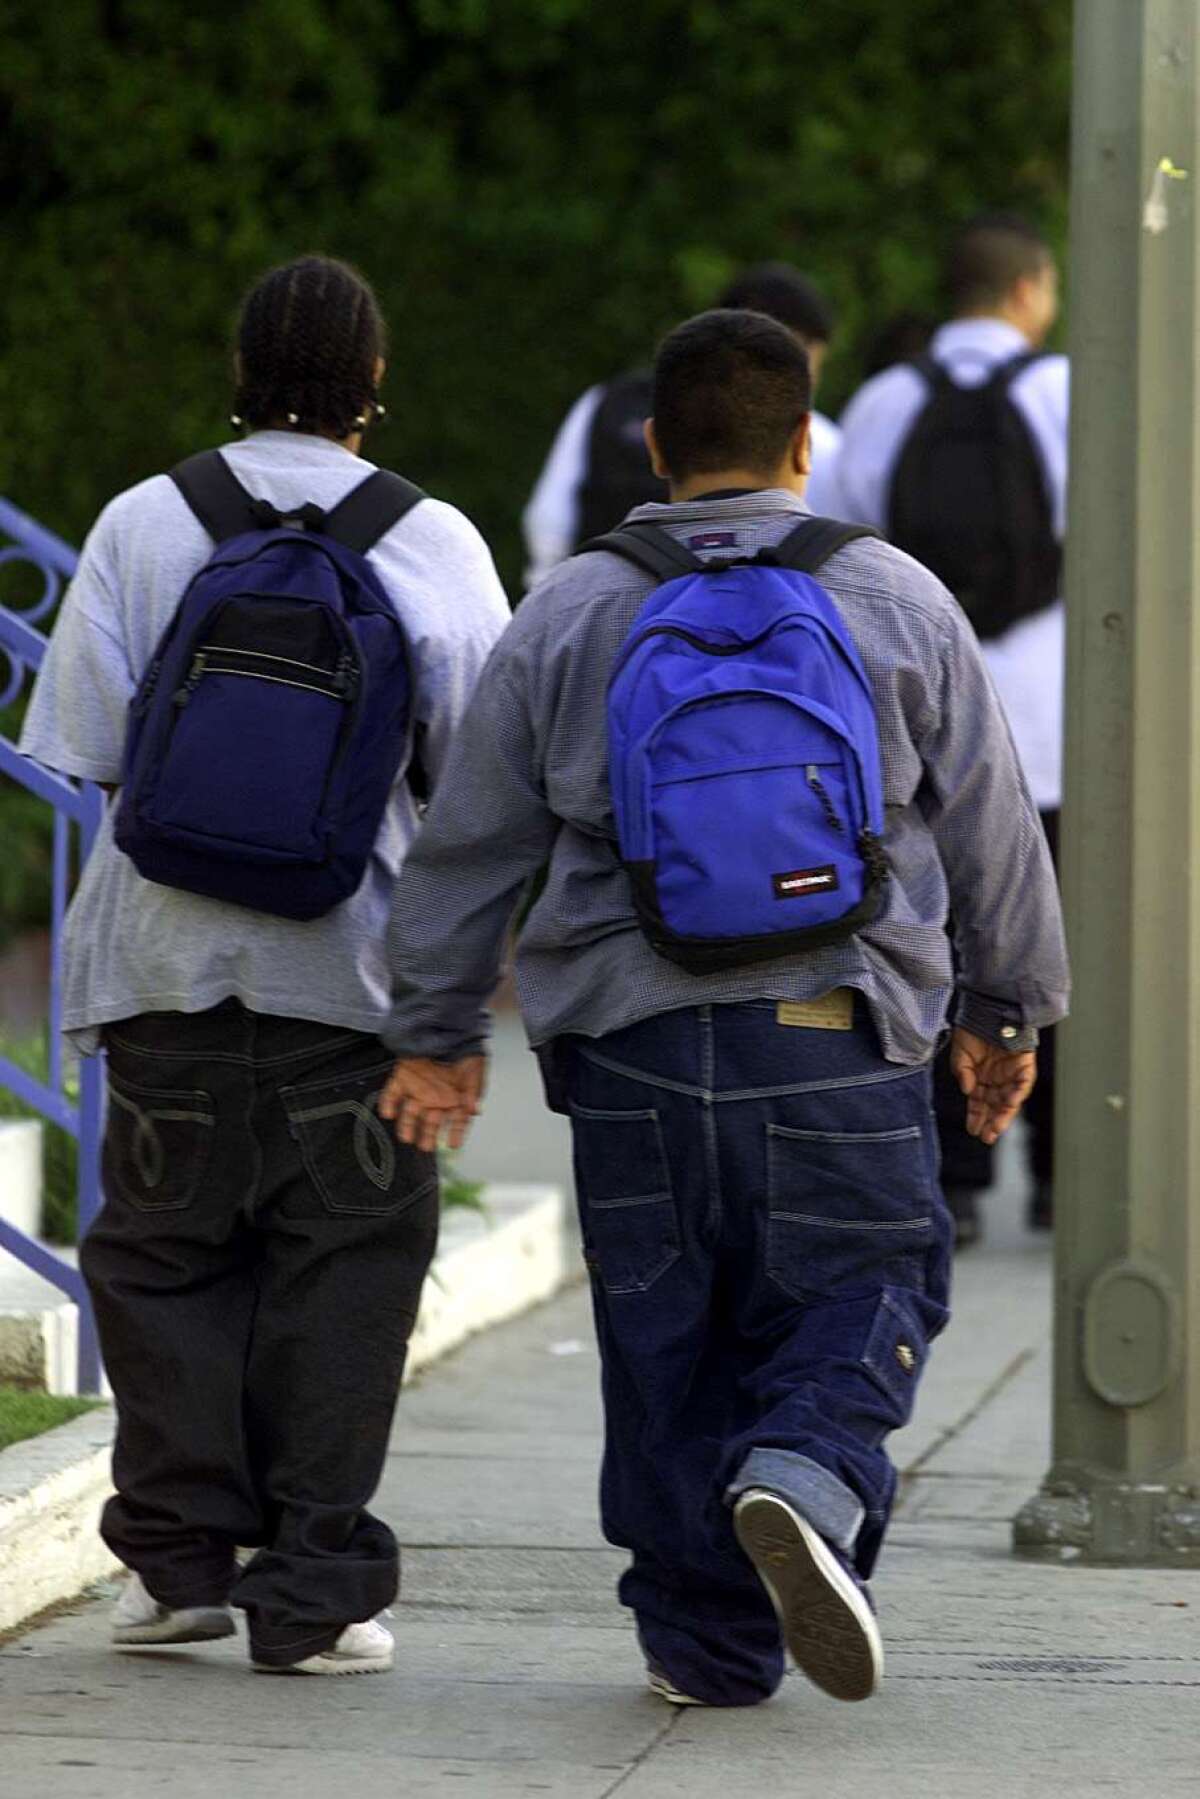 Overweight teens have a tougher time making friends among normal weight teens, researchers say.